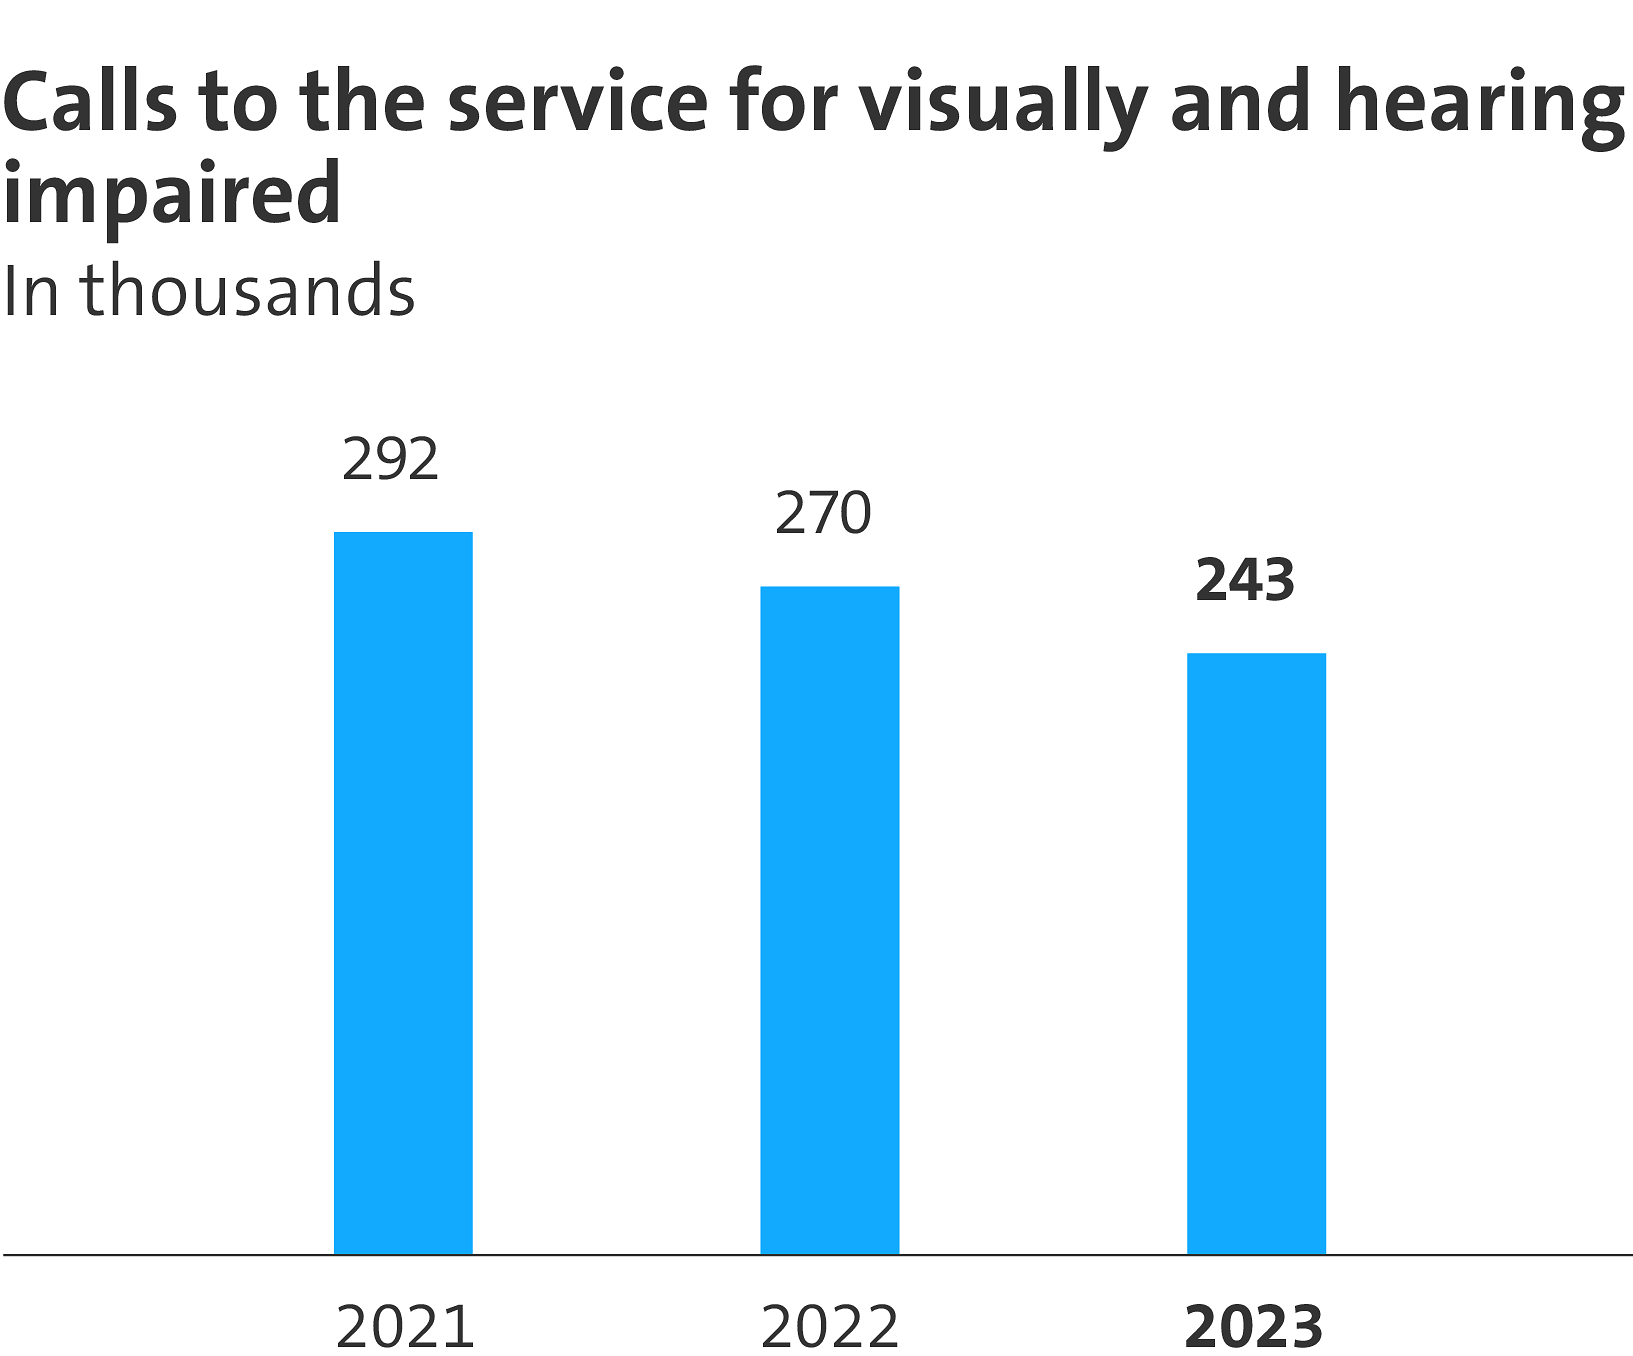 The graphic shows the number made to the service for visually and hearing impaired. There were 243,000 in 2023. The number of calls is declining.